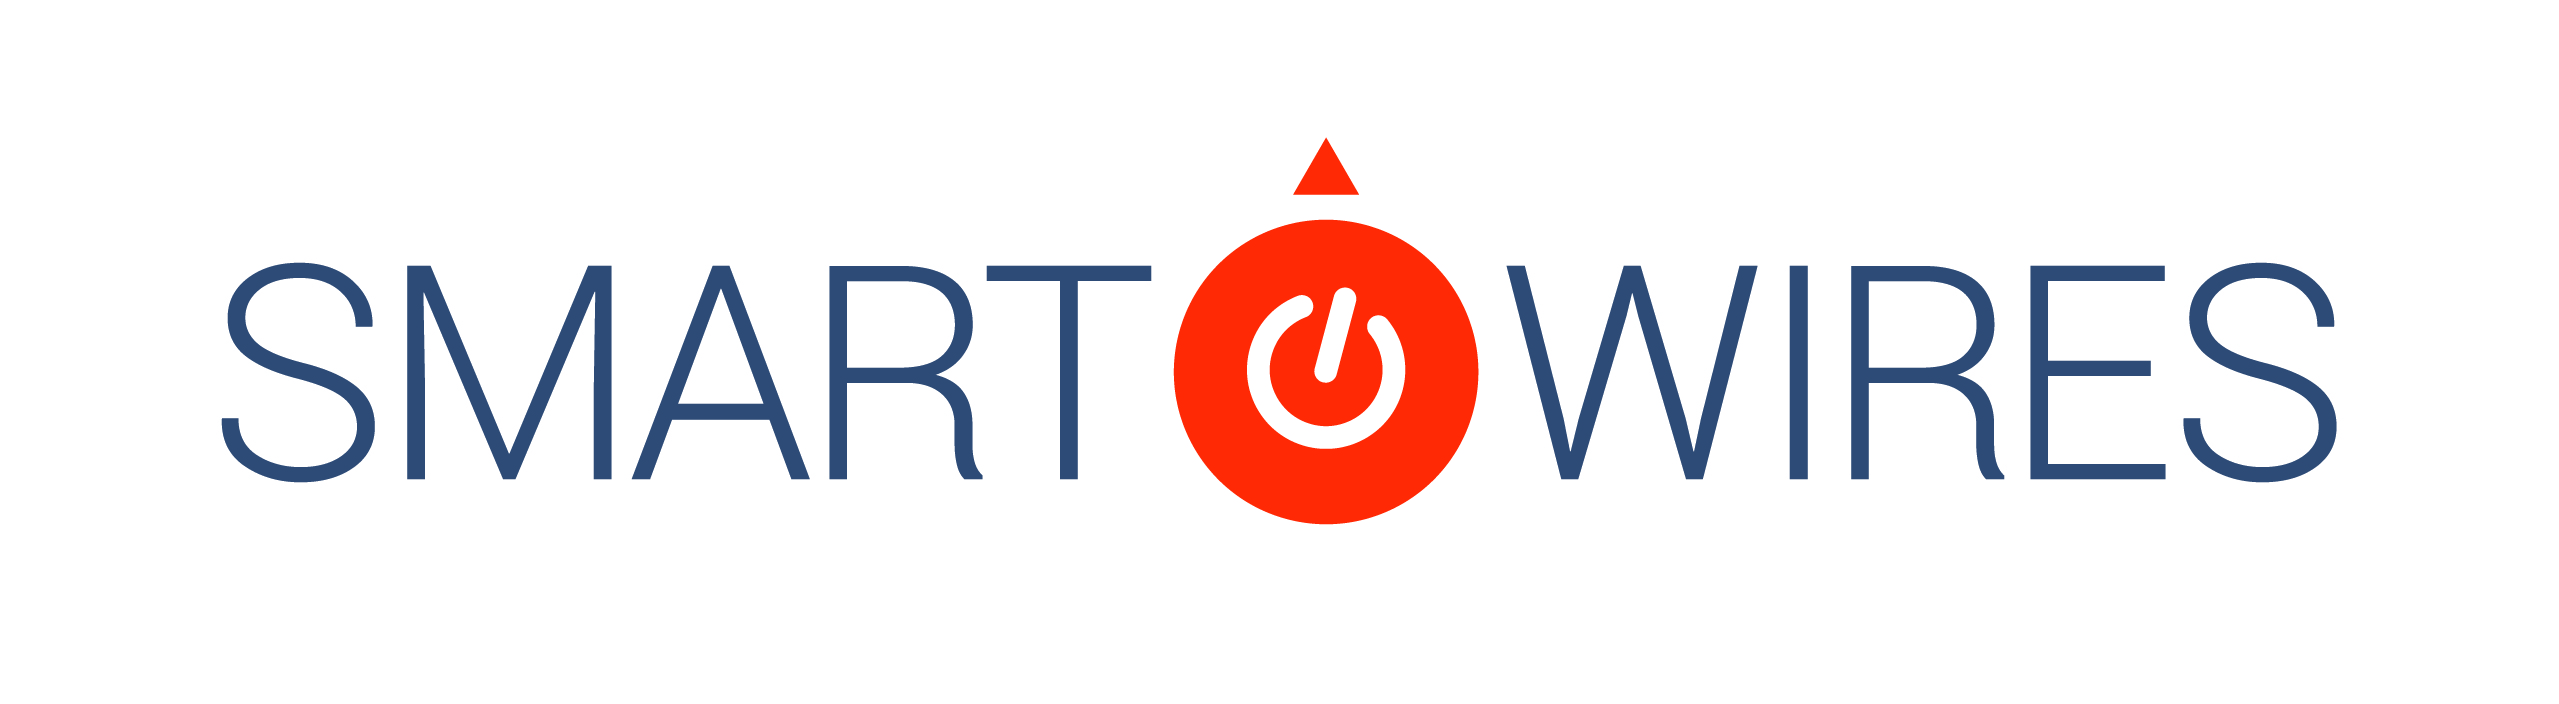 SMART WIRES PRIMARY LOGO WITHOUT TAGLINE-FULL COLOR